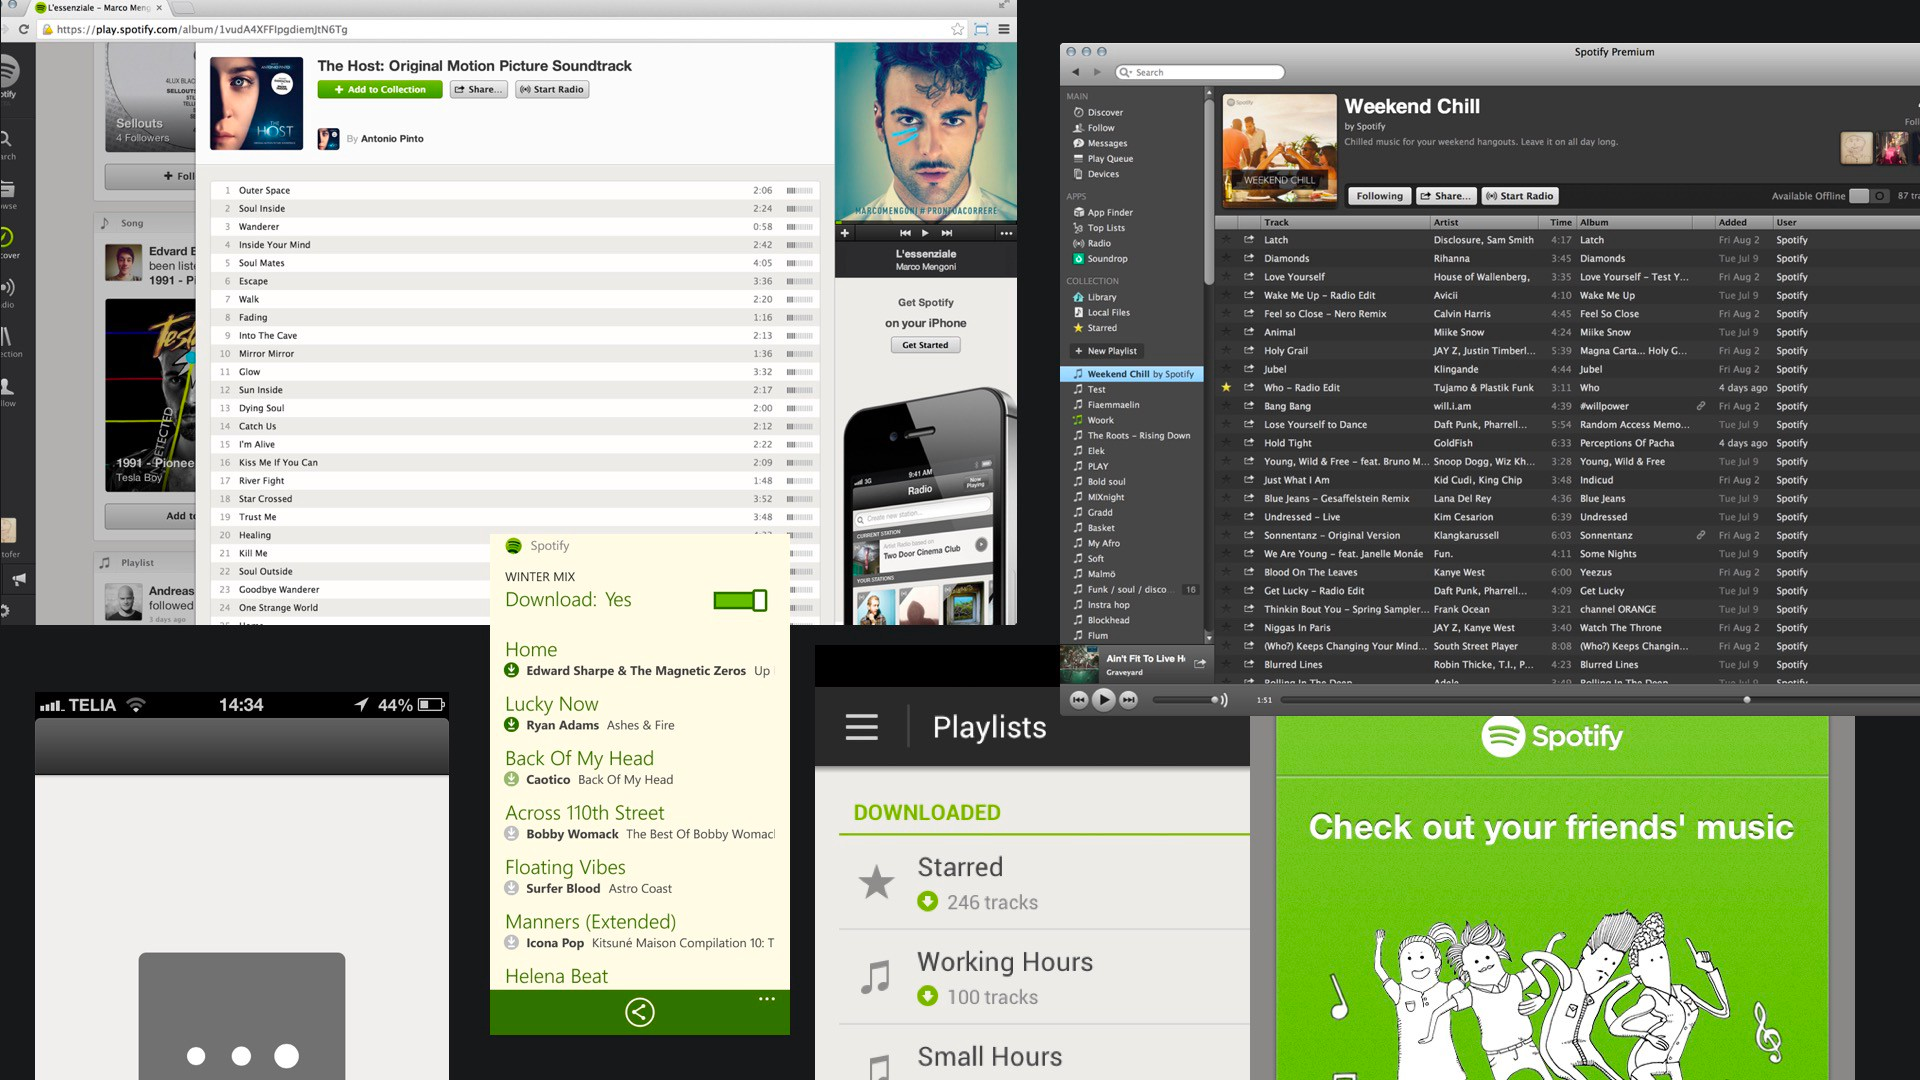 Reimagining Design Systems at Spotify, by Spotify Design, Spotify Design